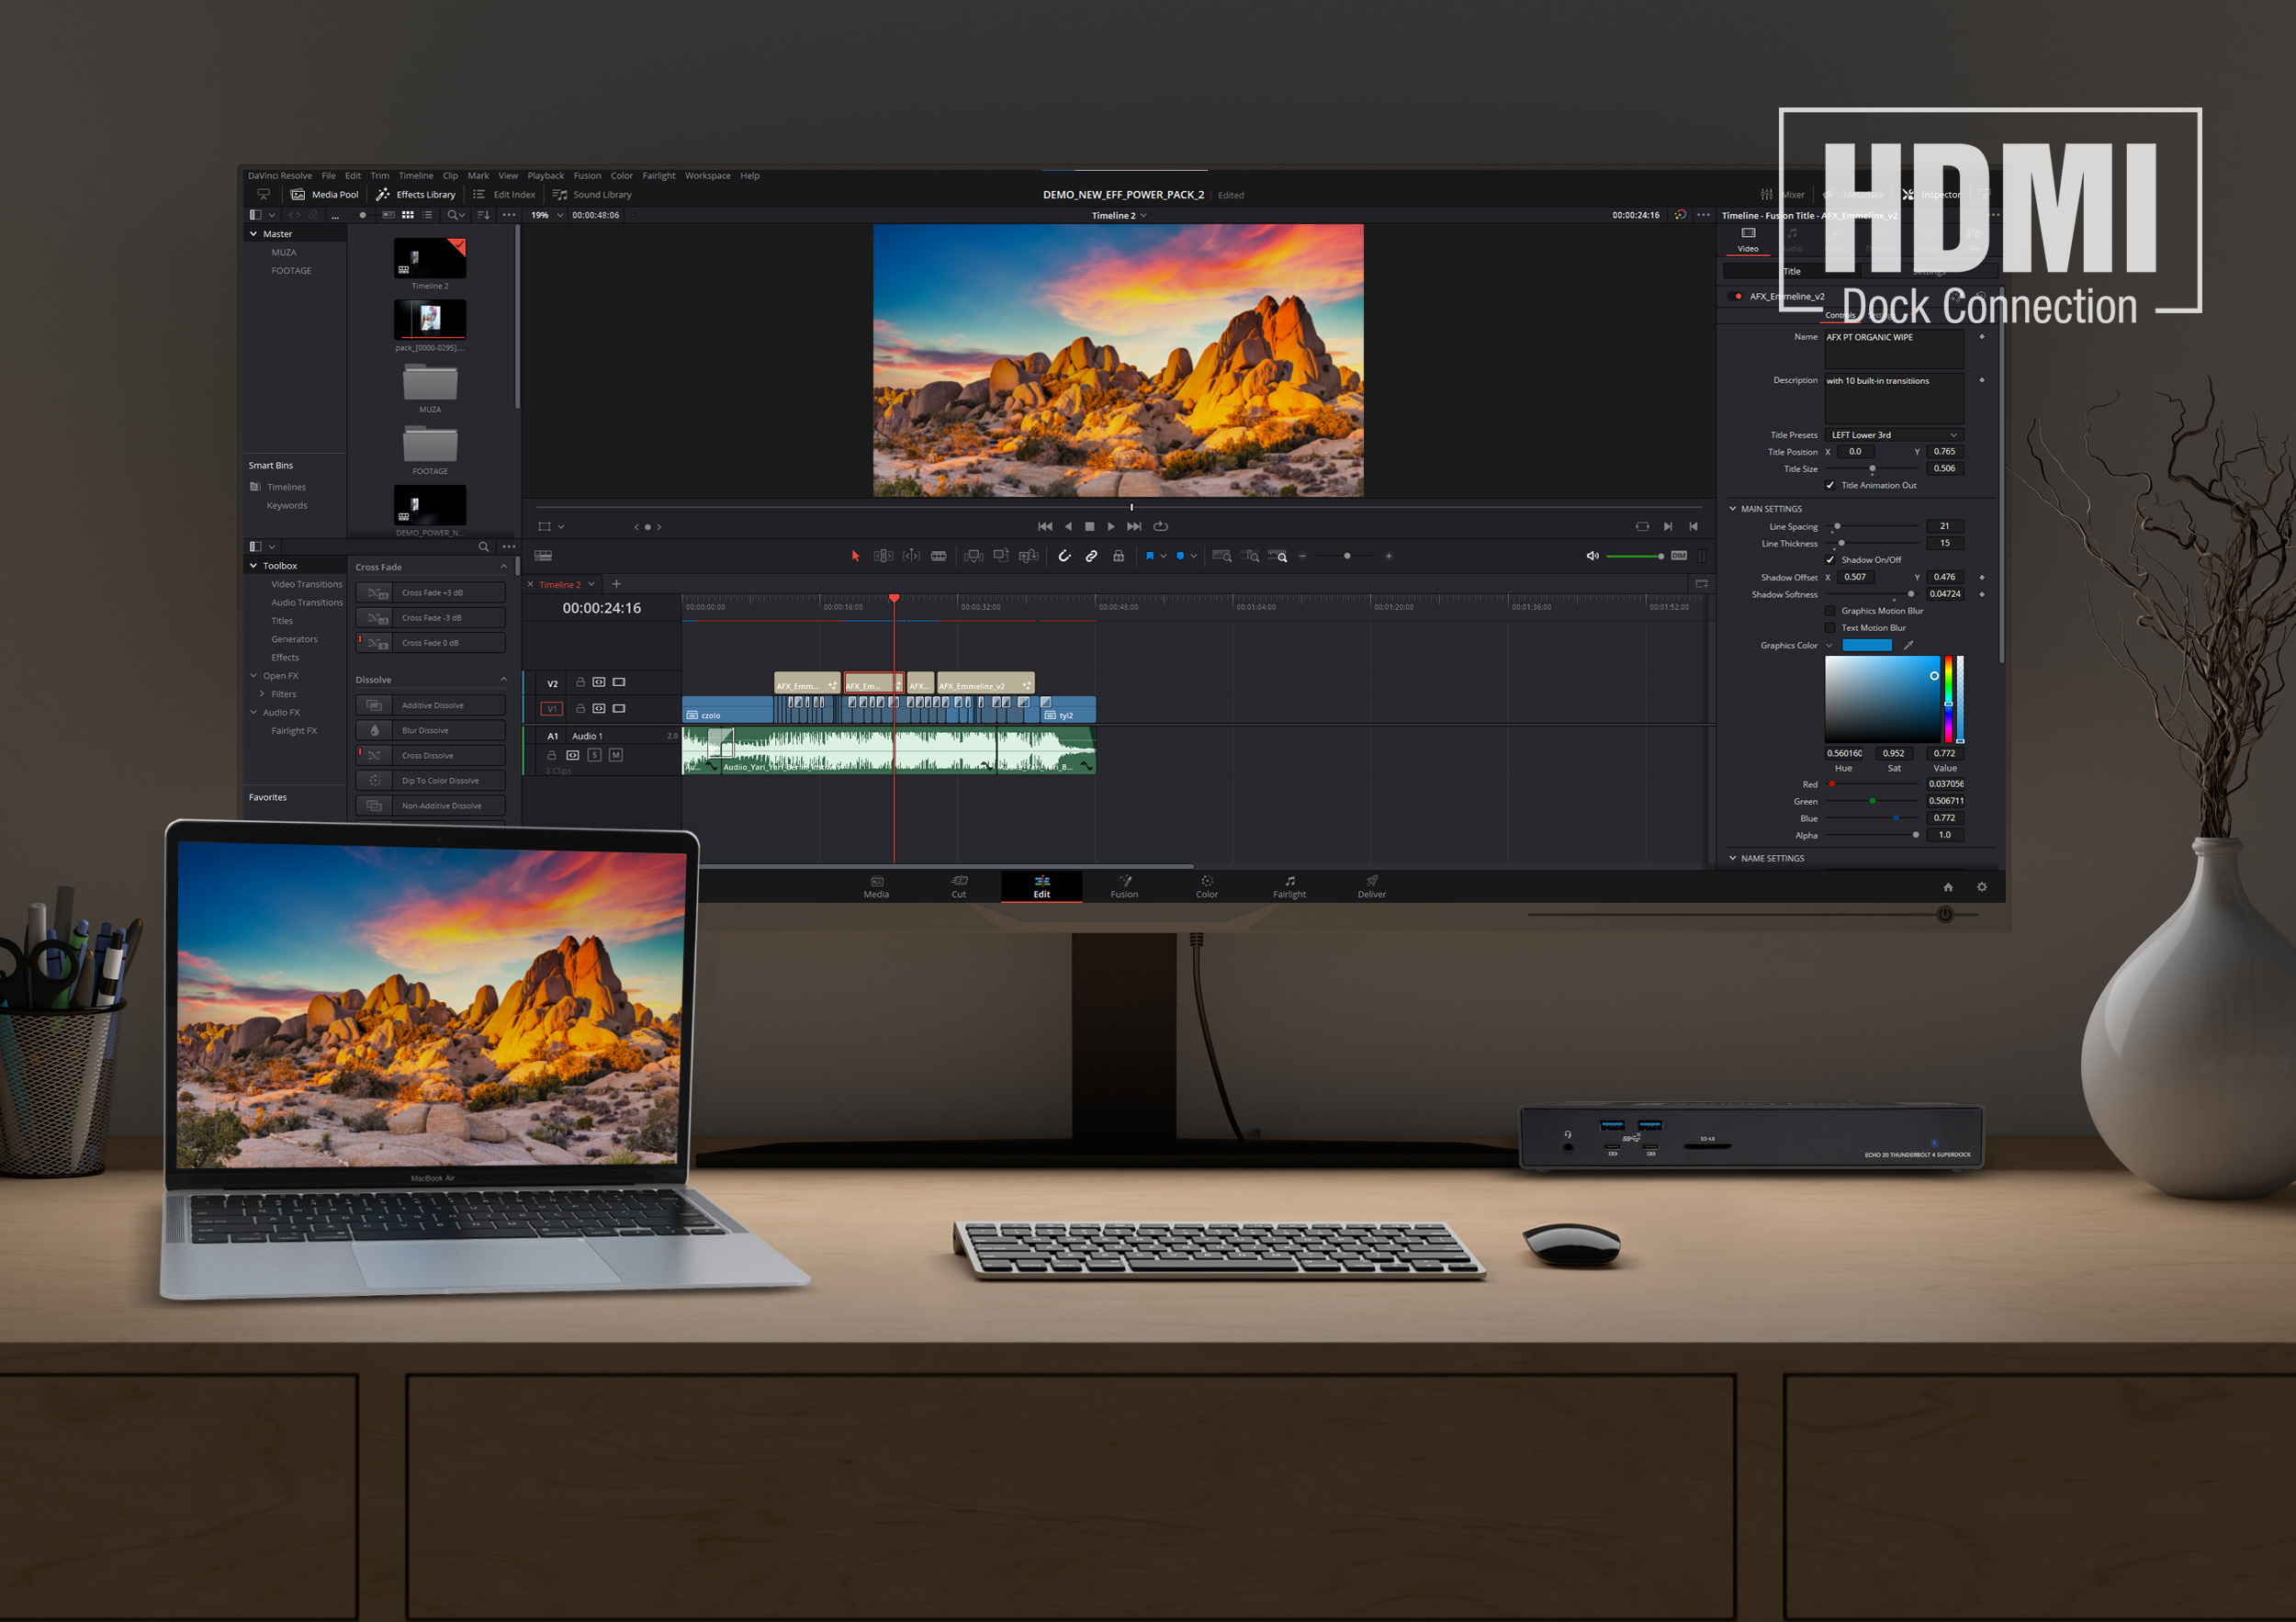 MacBook Pro and Echo 20 Dock Connected to Wide Panel HDMI Display